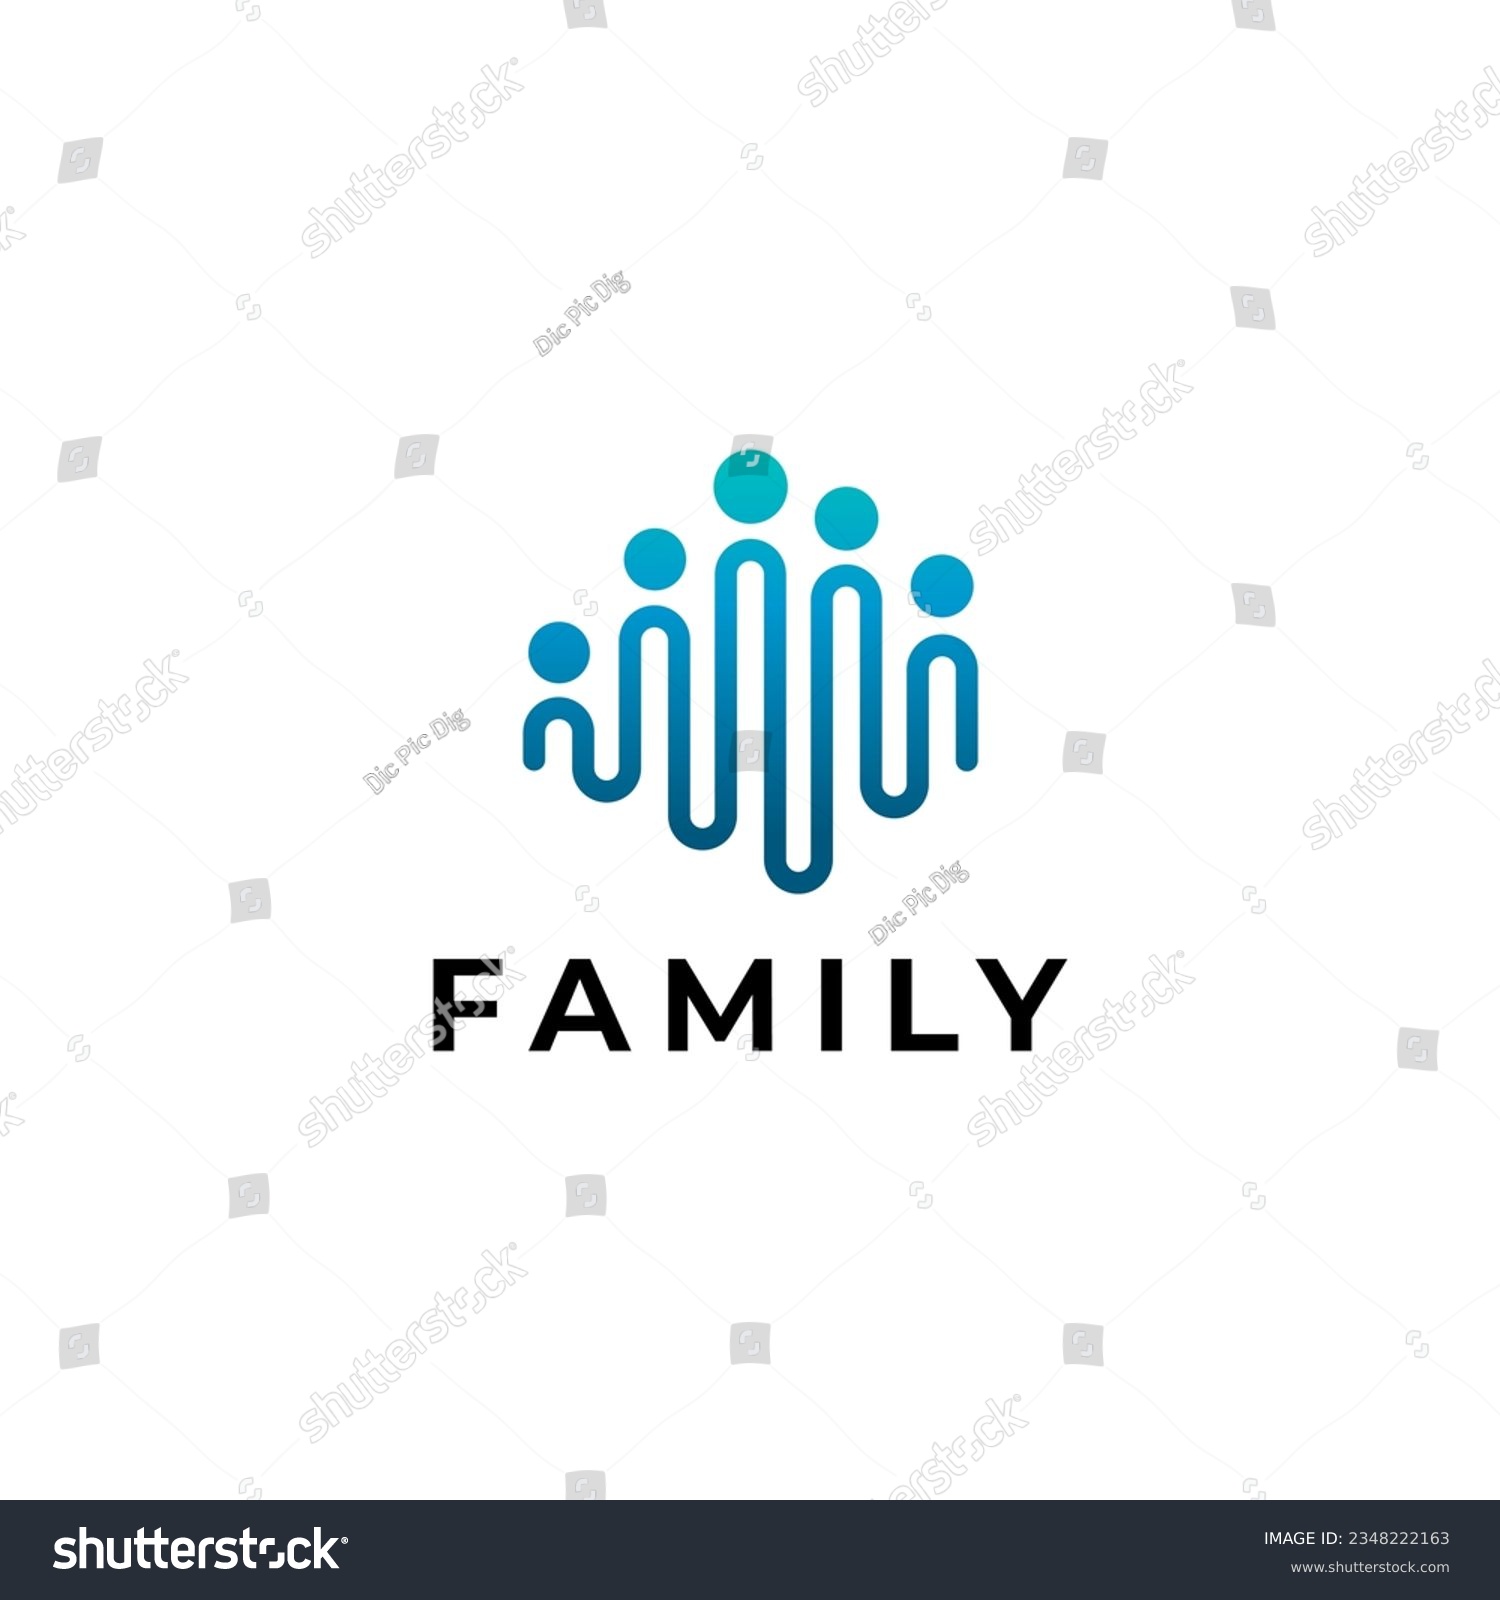 Abstract People Logo. Blue Rounded Line Linked Human Icon Pulse Wave Style isolated on White Background. Usable for Teamwork and Family Logos. Flat Vector Logo Design Template Element #2348222163